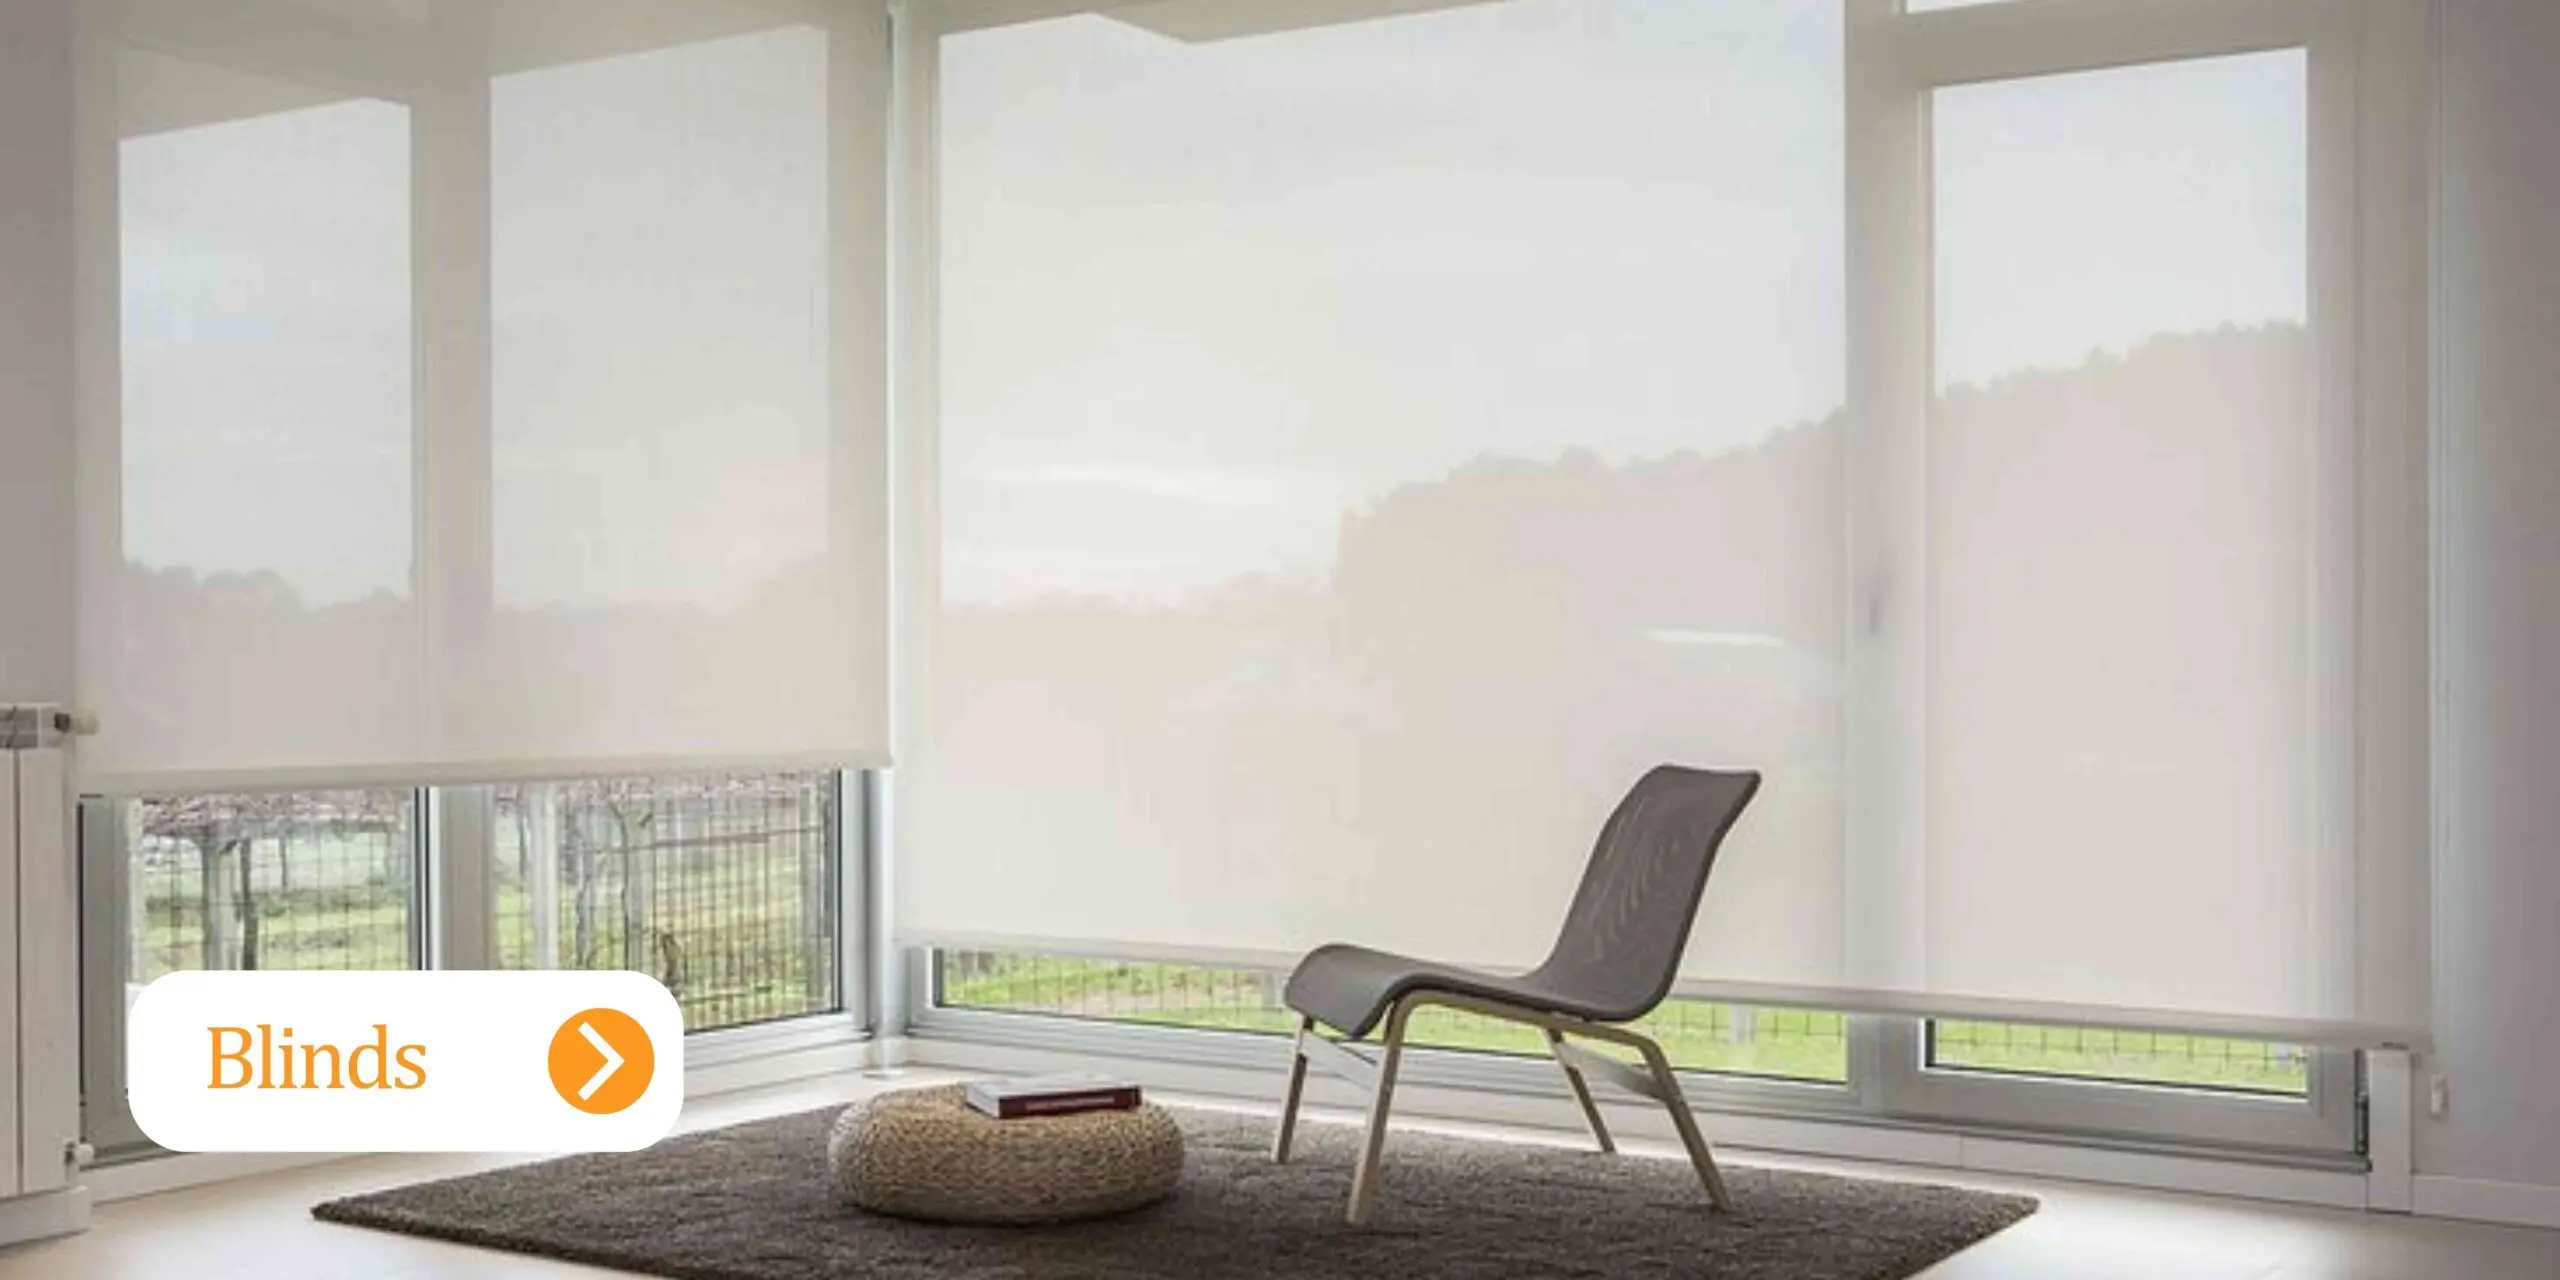 Blinds product